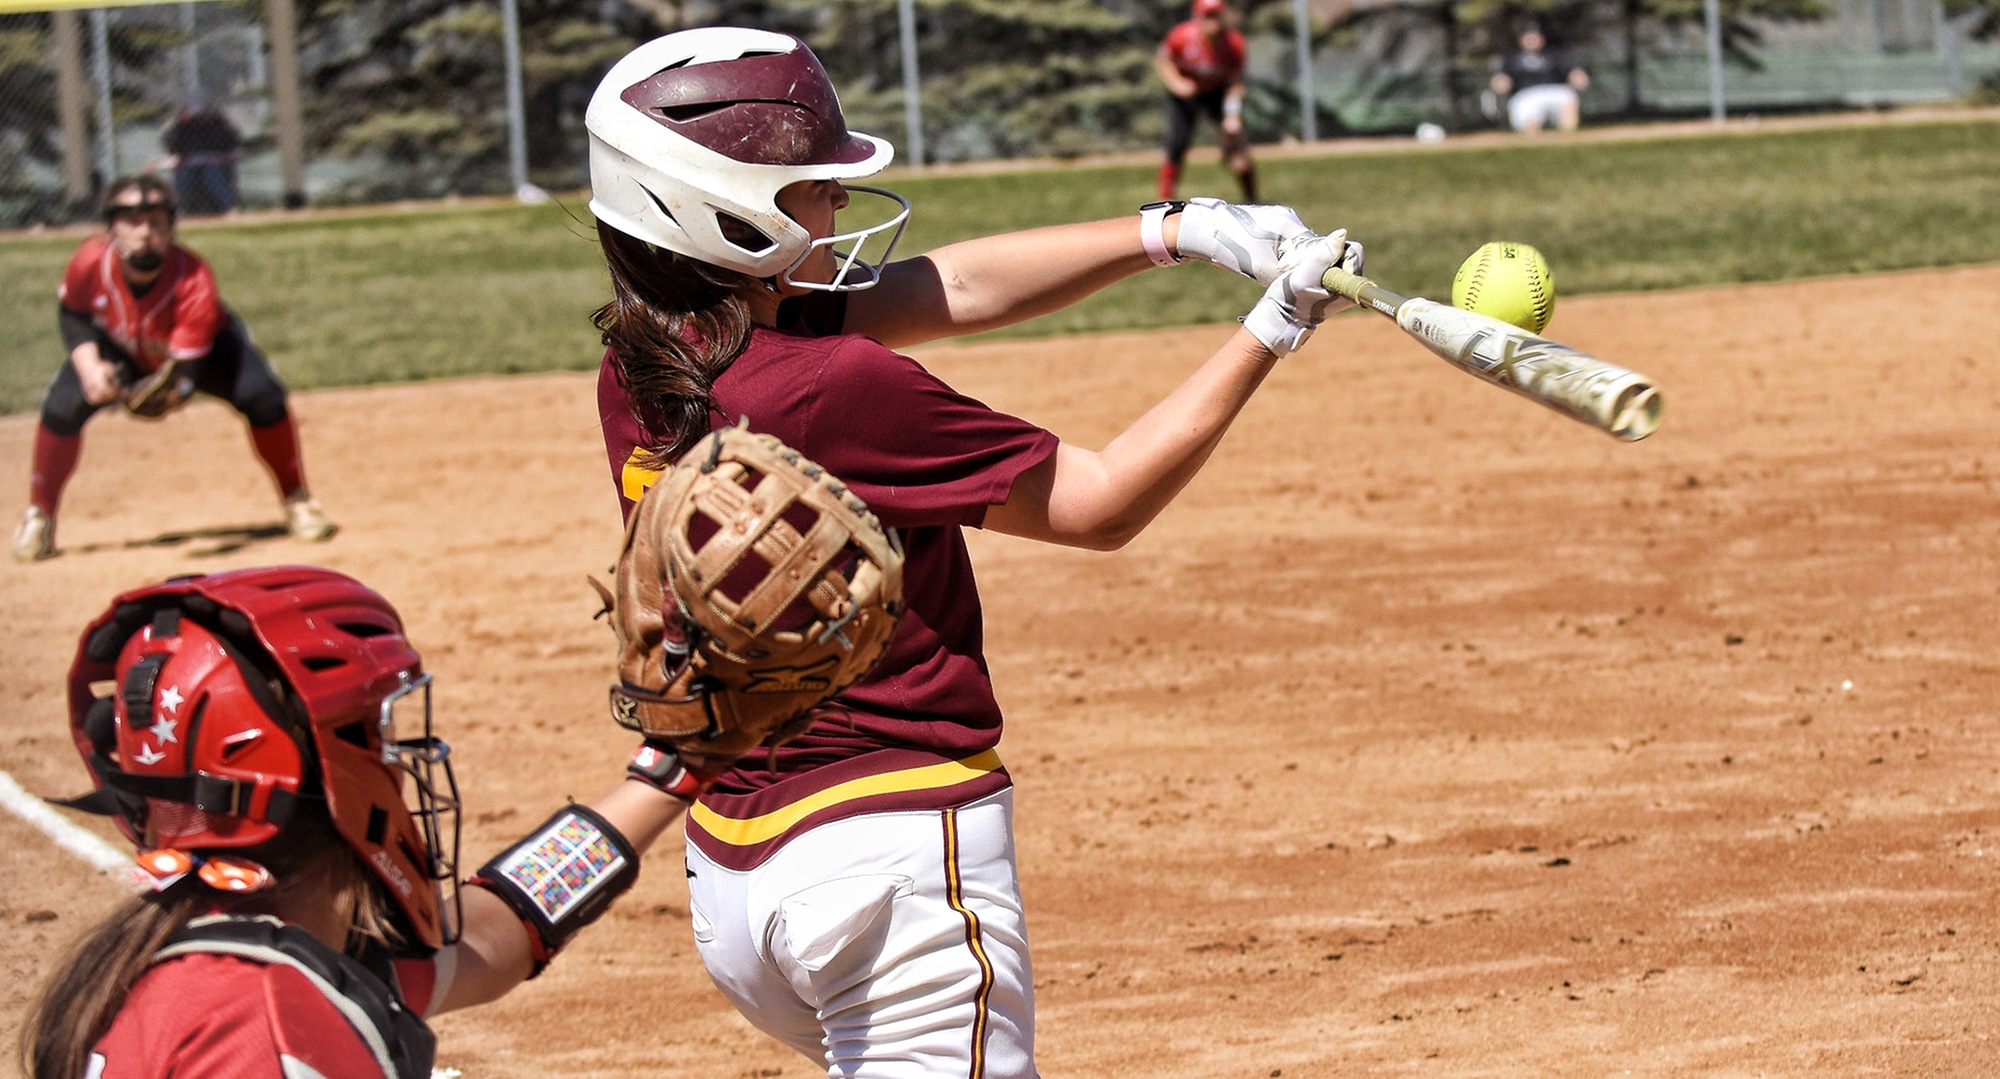 Sophomore Callie Ahlgren led the Cobbers in their 8-5 win against Saint Vincent as she went 3-for-4 and scored two runs.